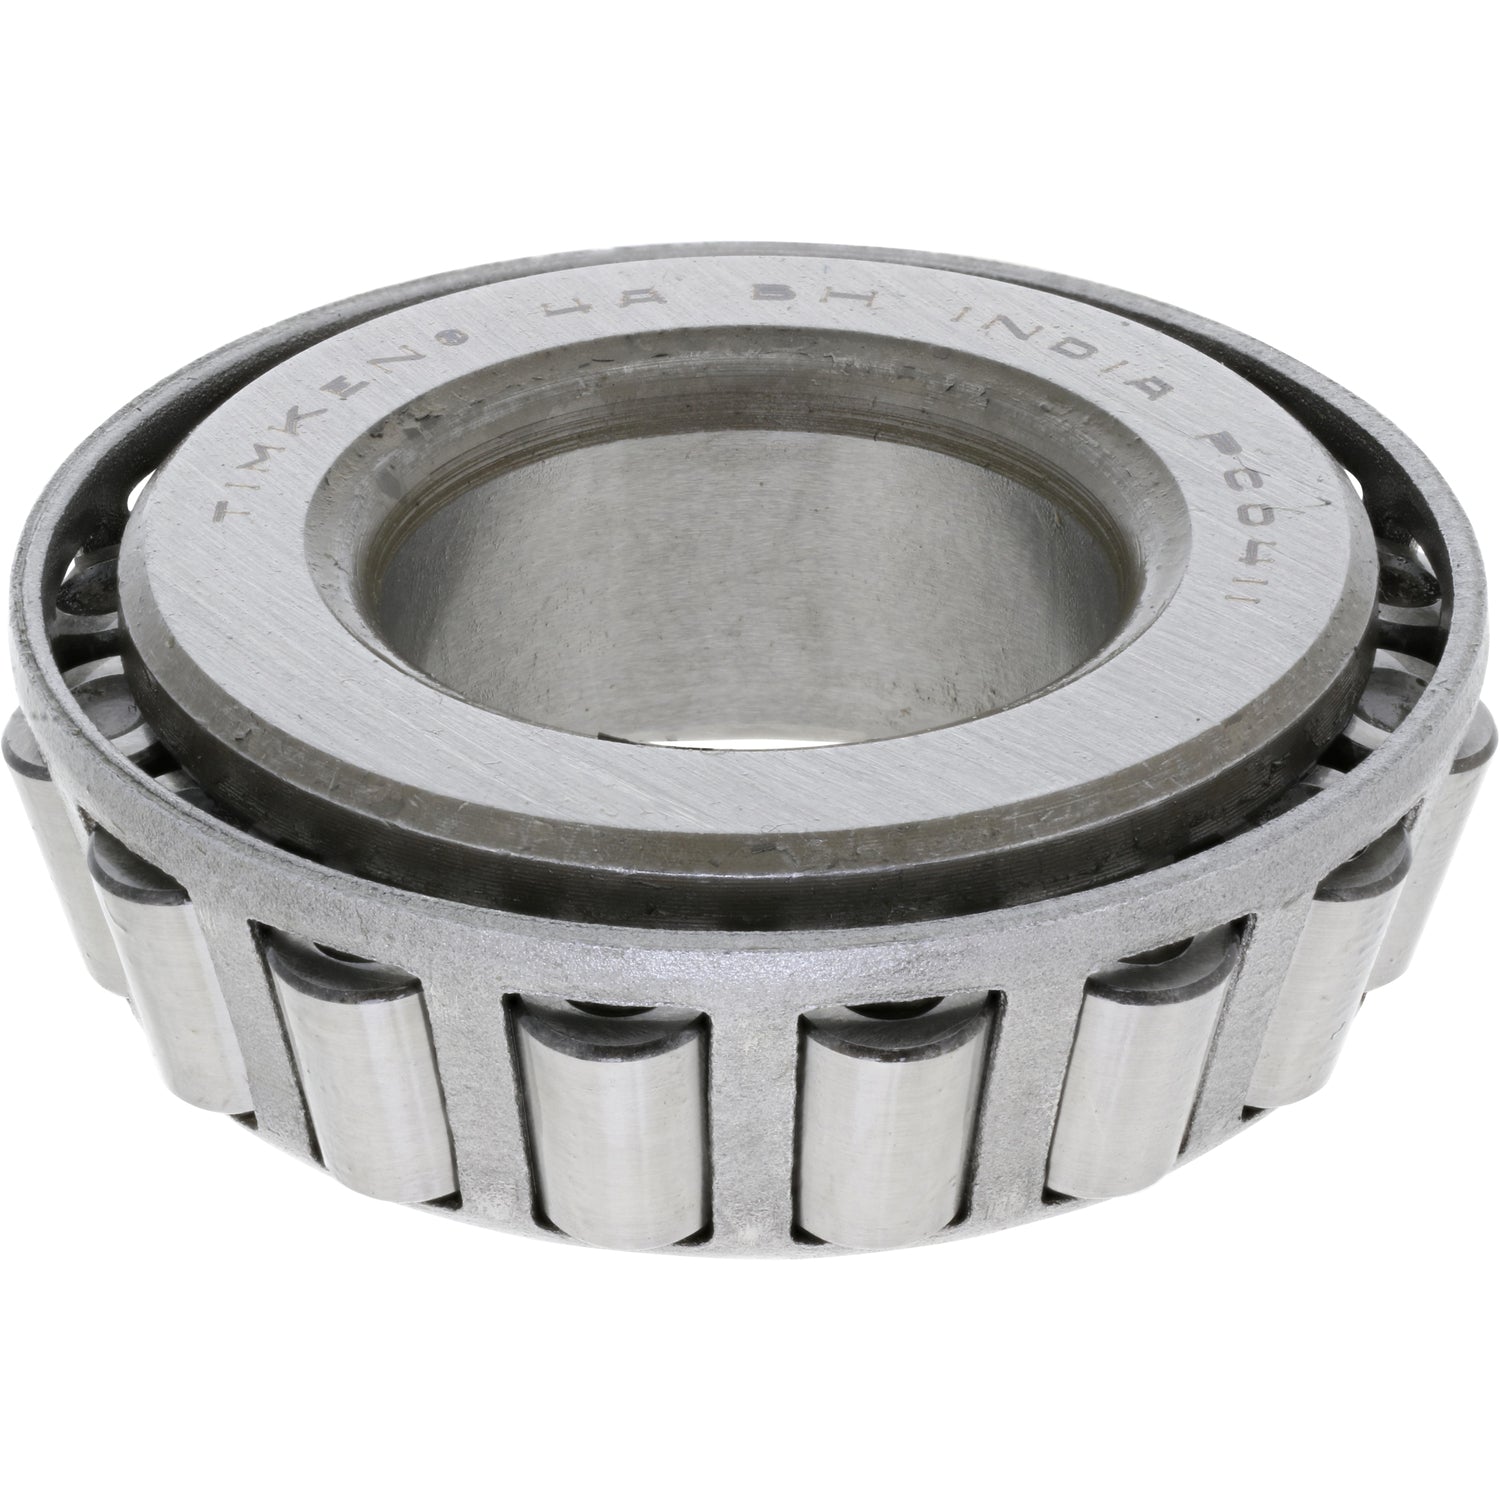 Steel tapered bearing on white background. 